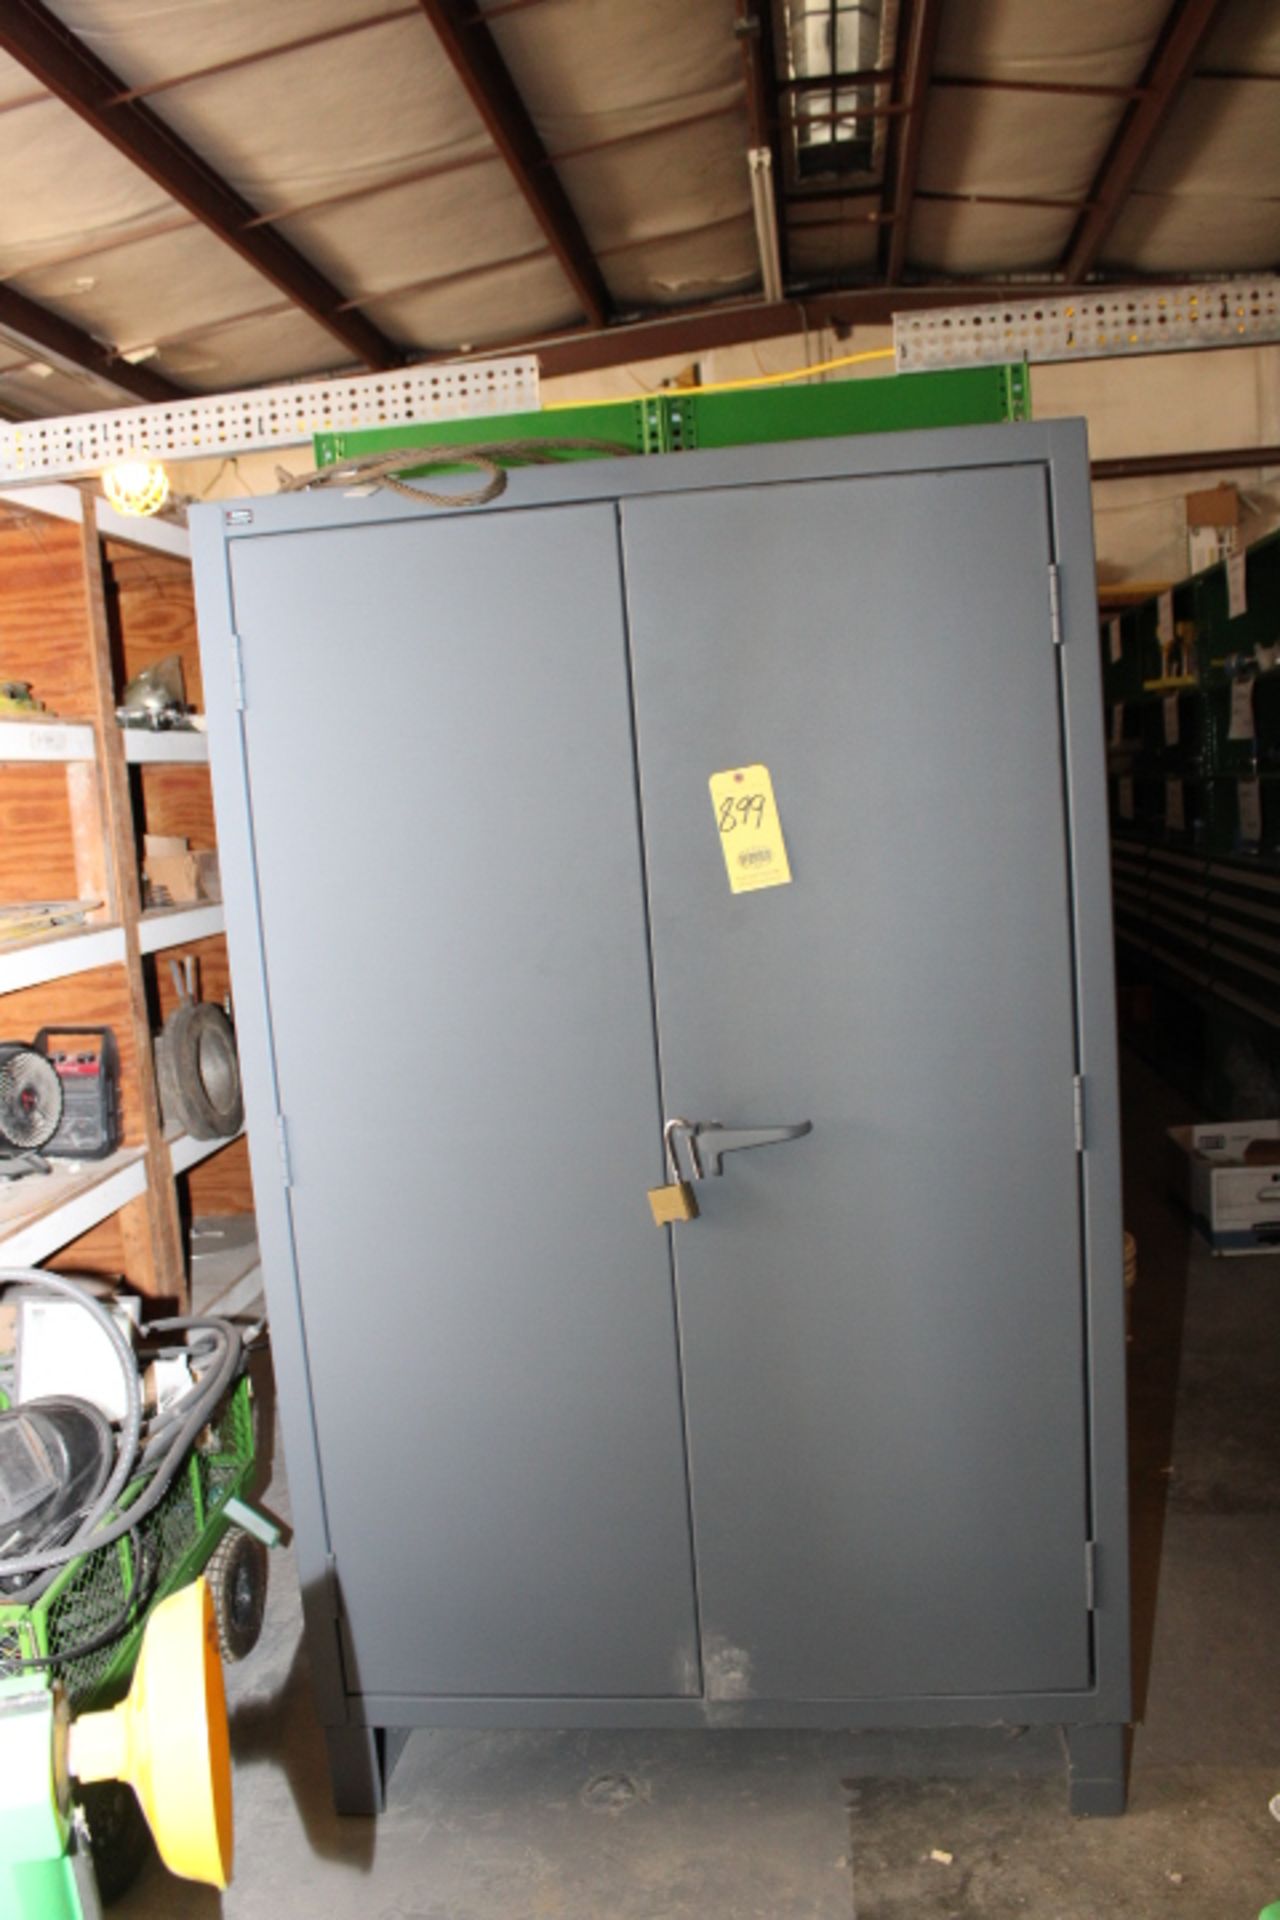 STORAGE CABINET, GLOBAL, H.D., 48"W. x 78" ht. x 24" dp, (4) shelves (delayed removal) (contents not